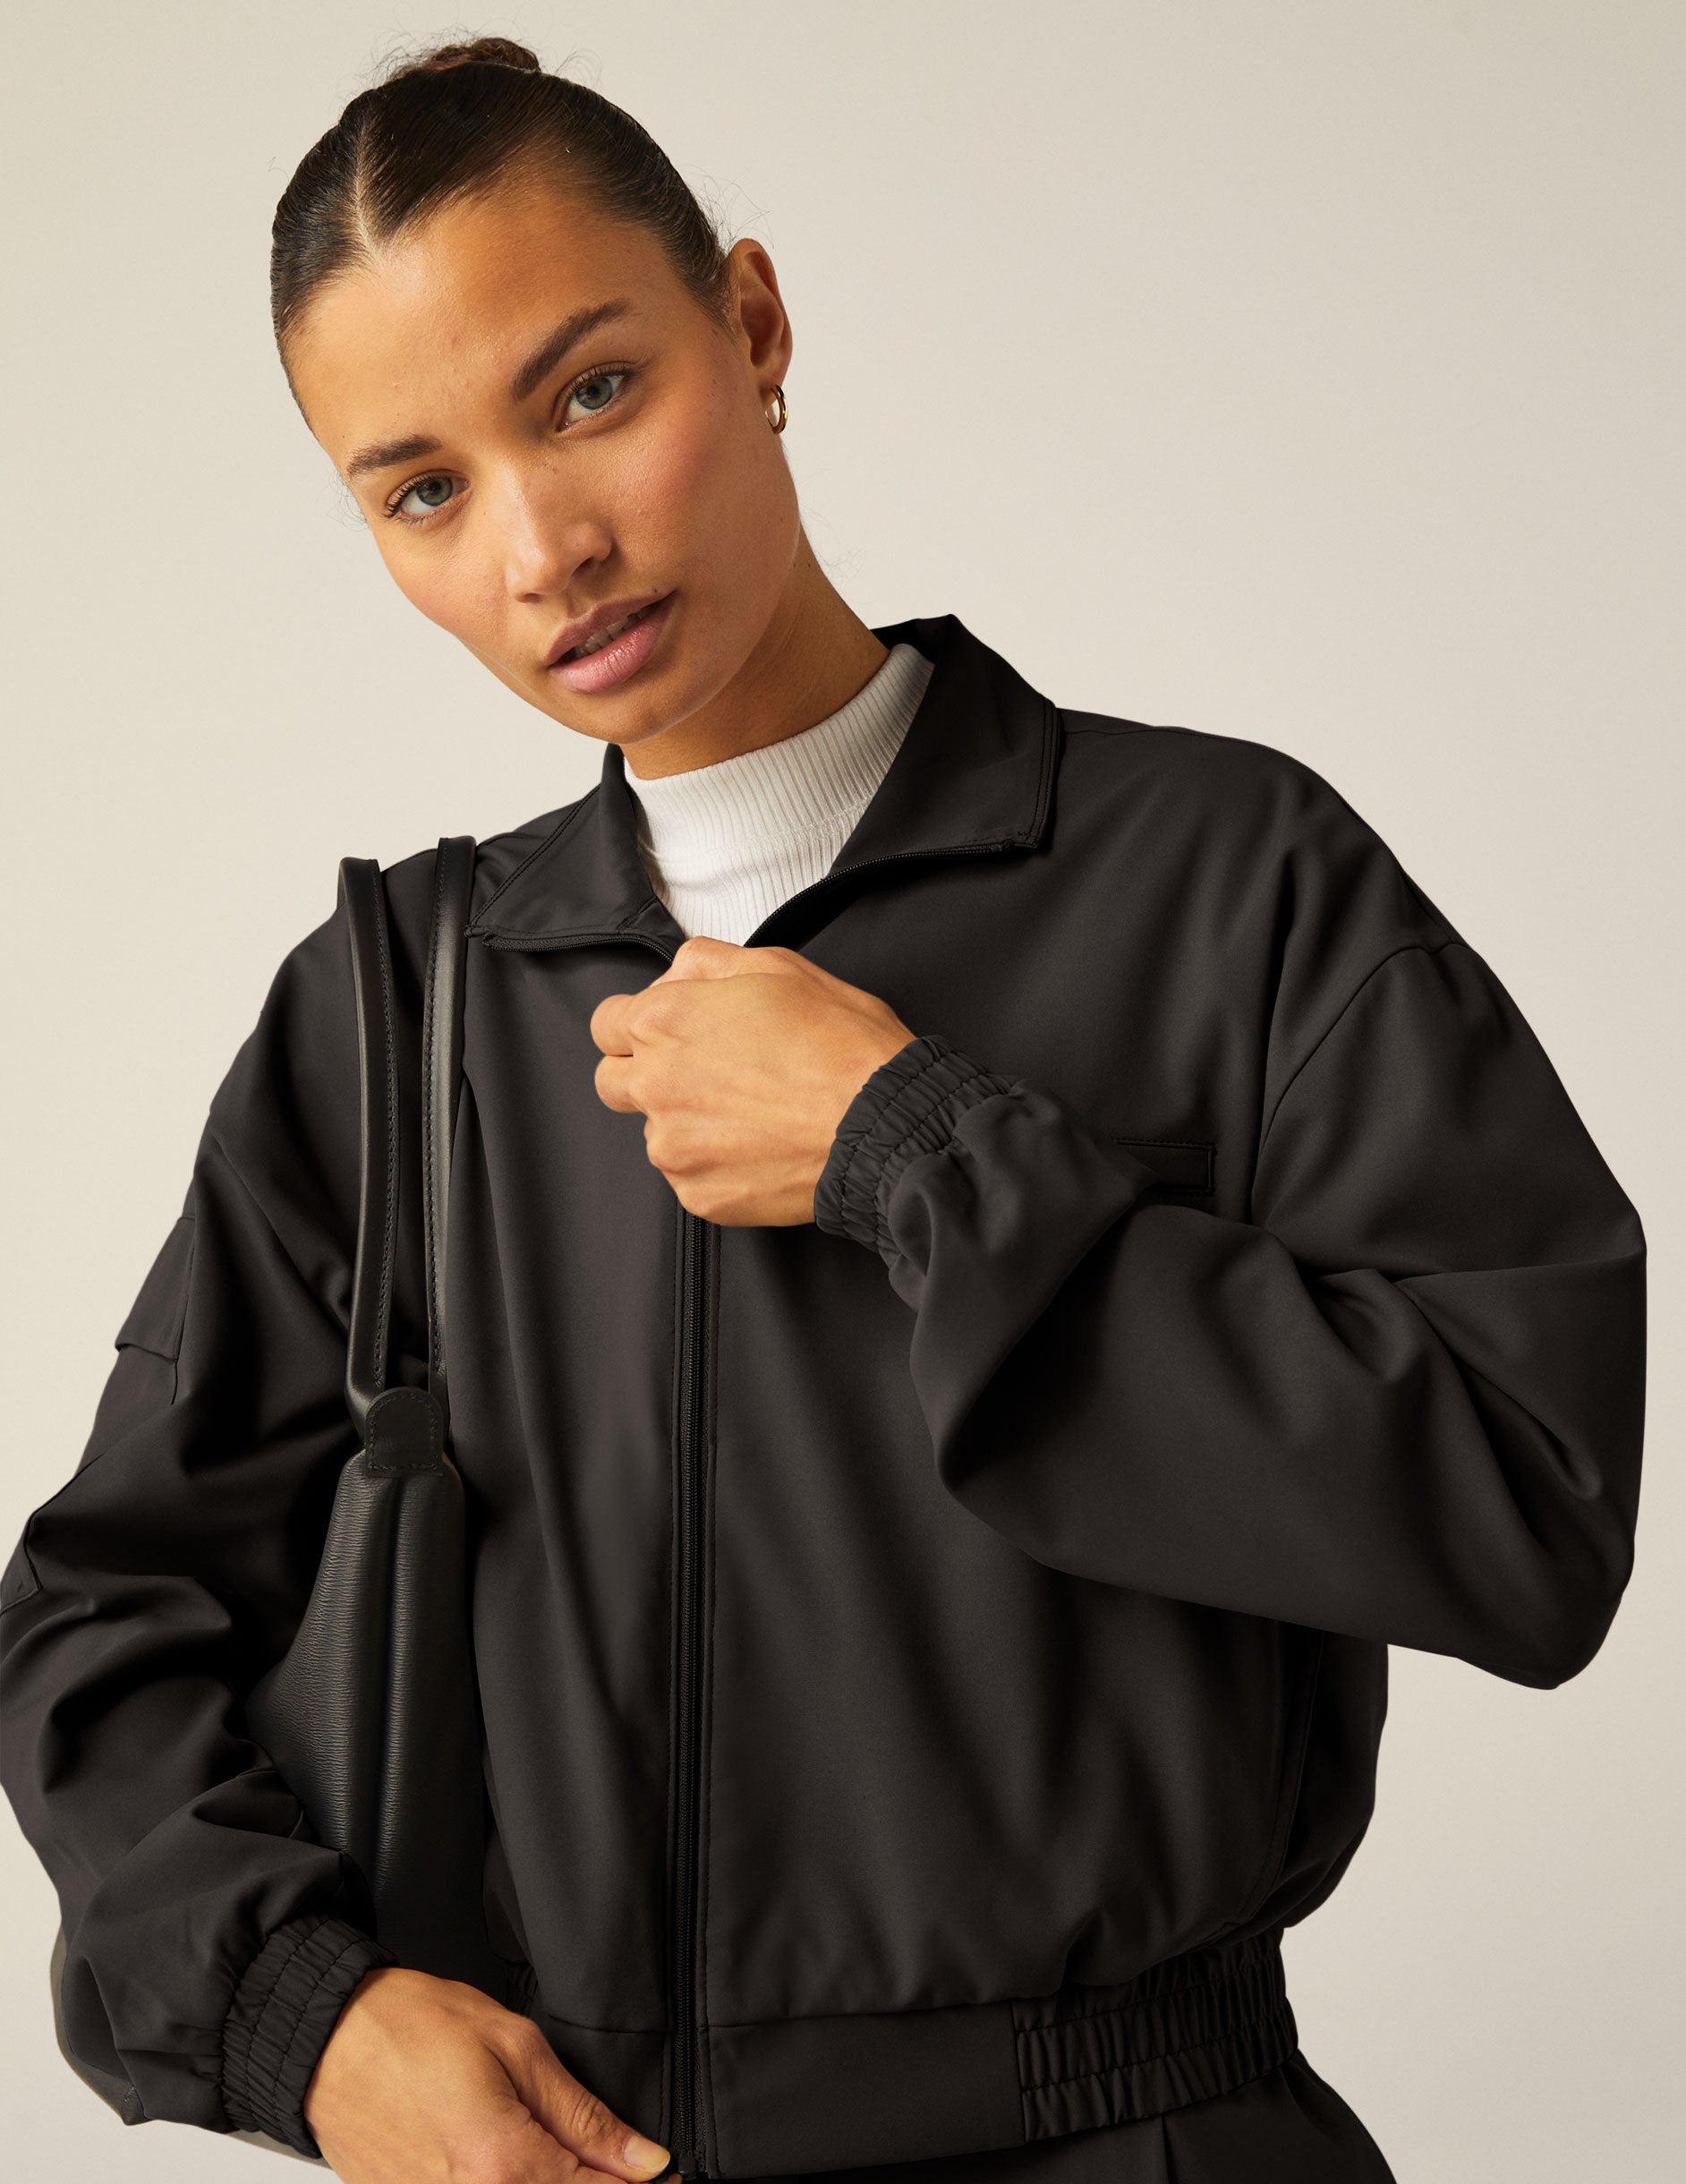 black zip-up jetstretch woven jacket with a collar. 